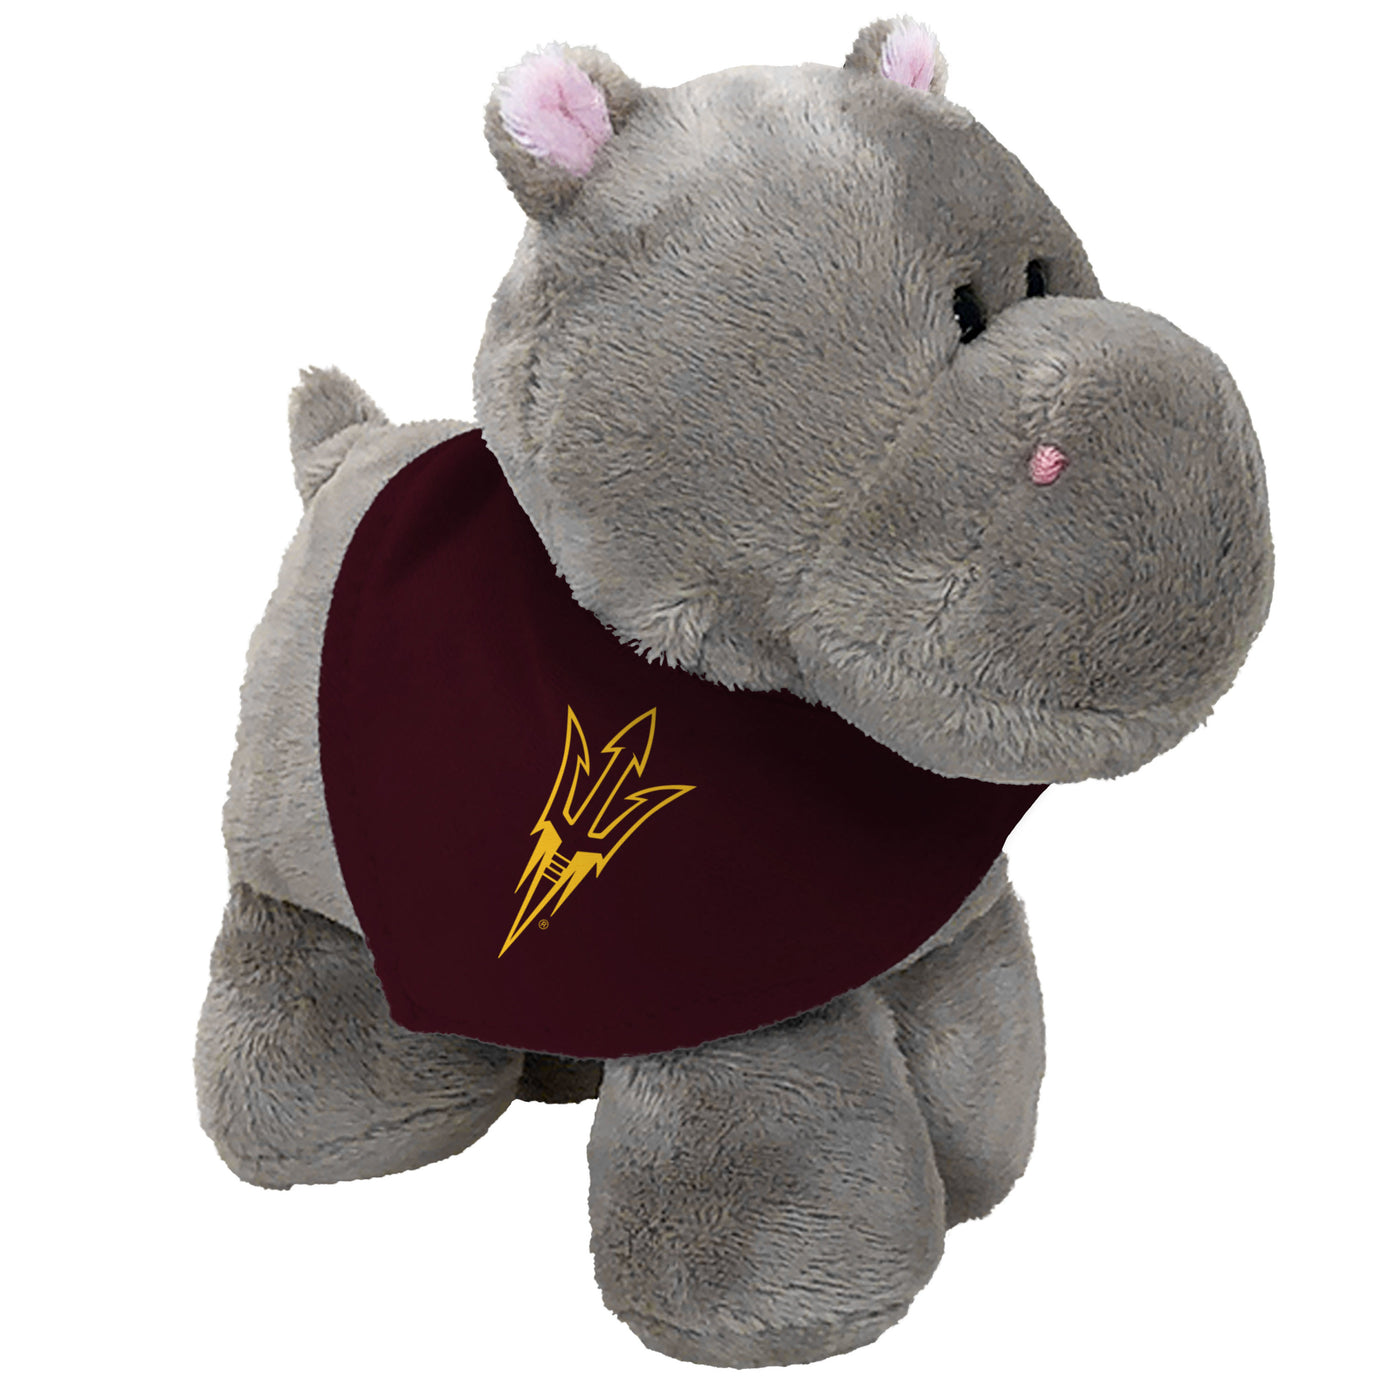 ASU hippo stuffed animal with maroon bandana with a pitchfork on the front